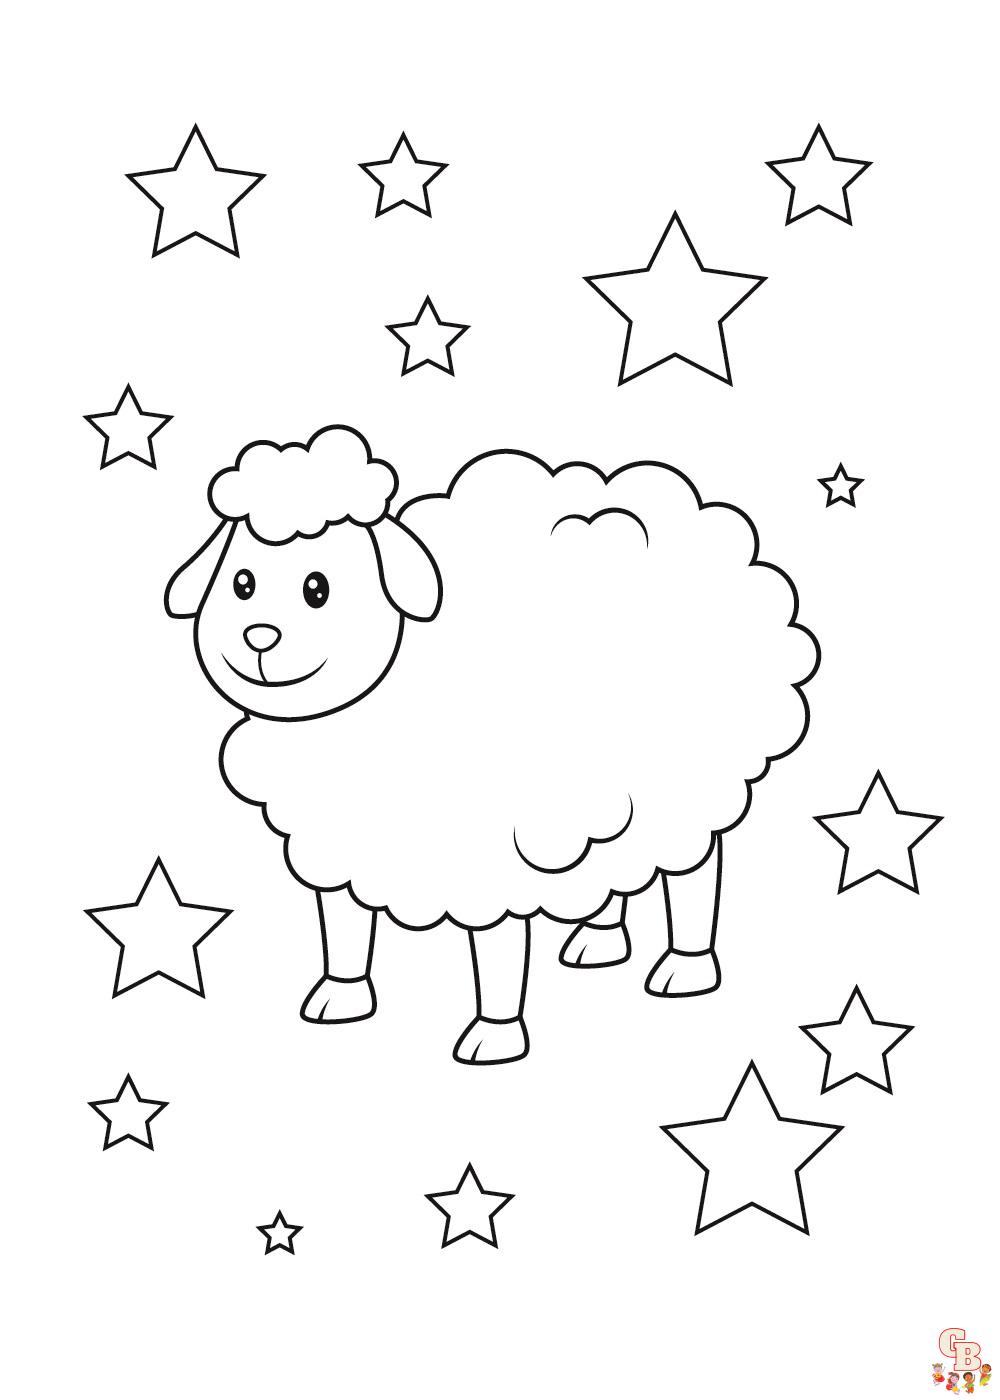 Cute Lamb Coloring Pages